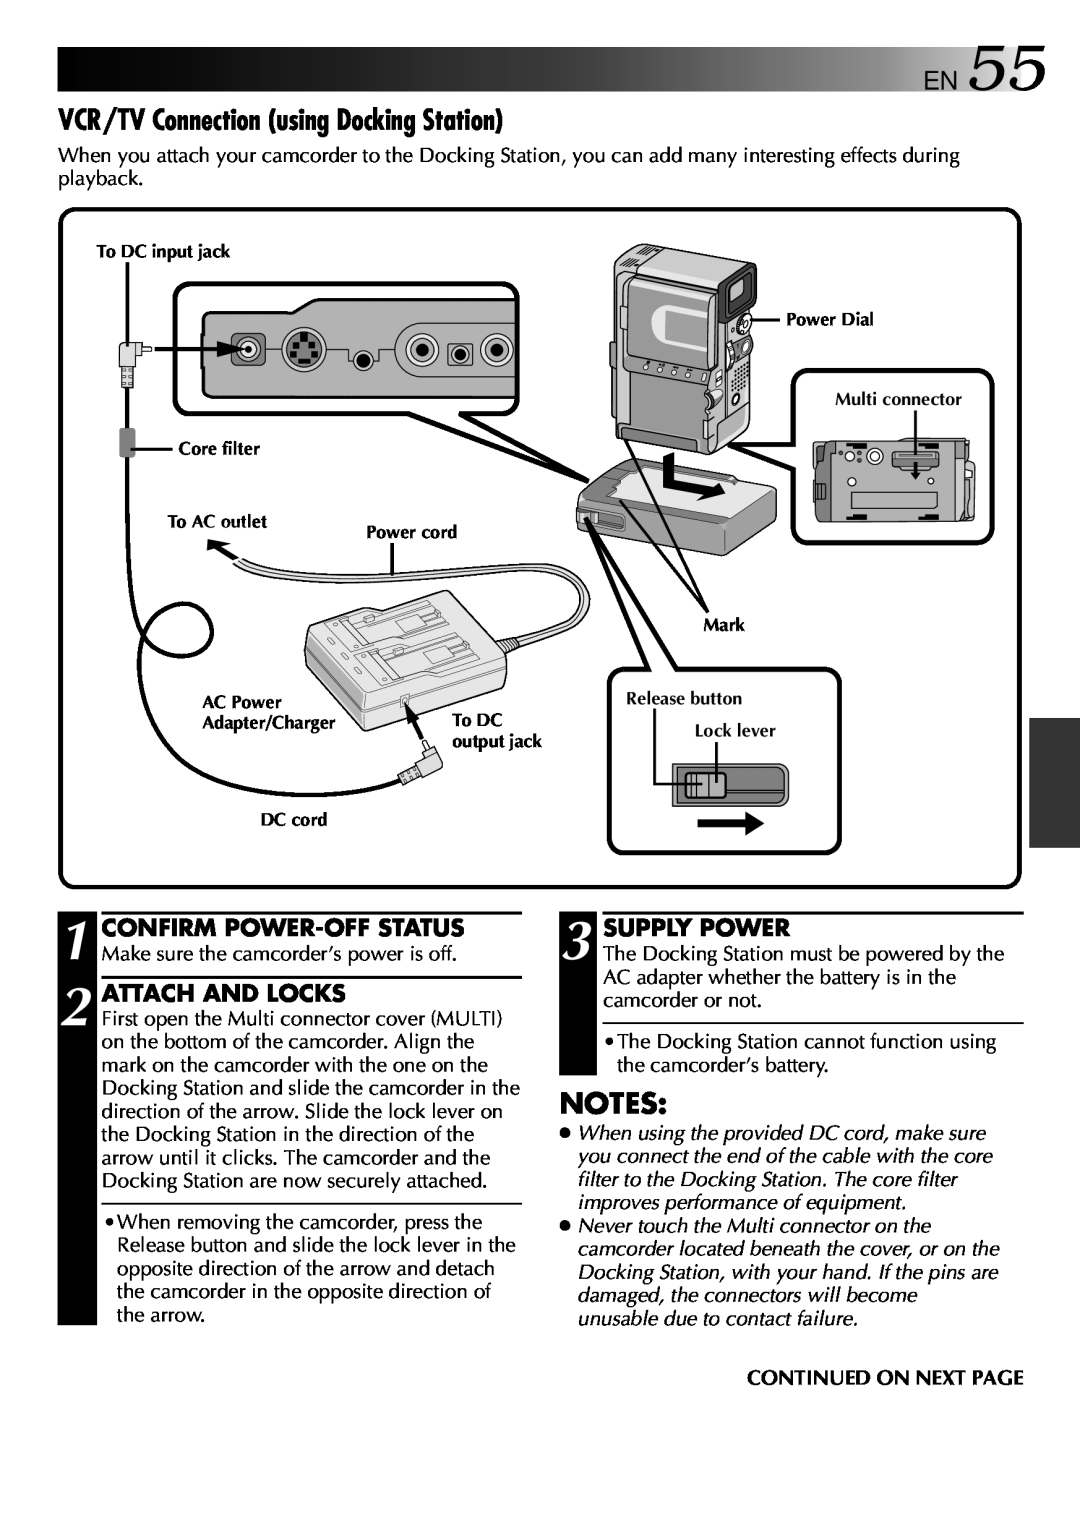 JVC 0797TOV*UN*VP VCR/TV Connection using Docking Station, Confirm Power-Off Status, Supply Power, Attach And Locks 